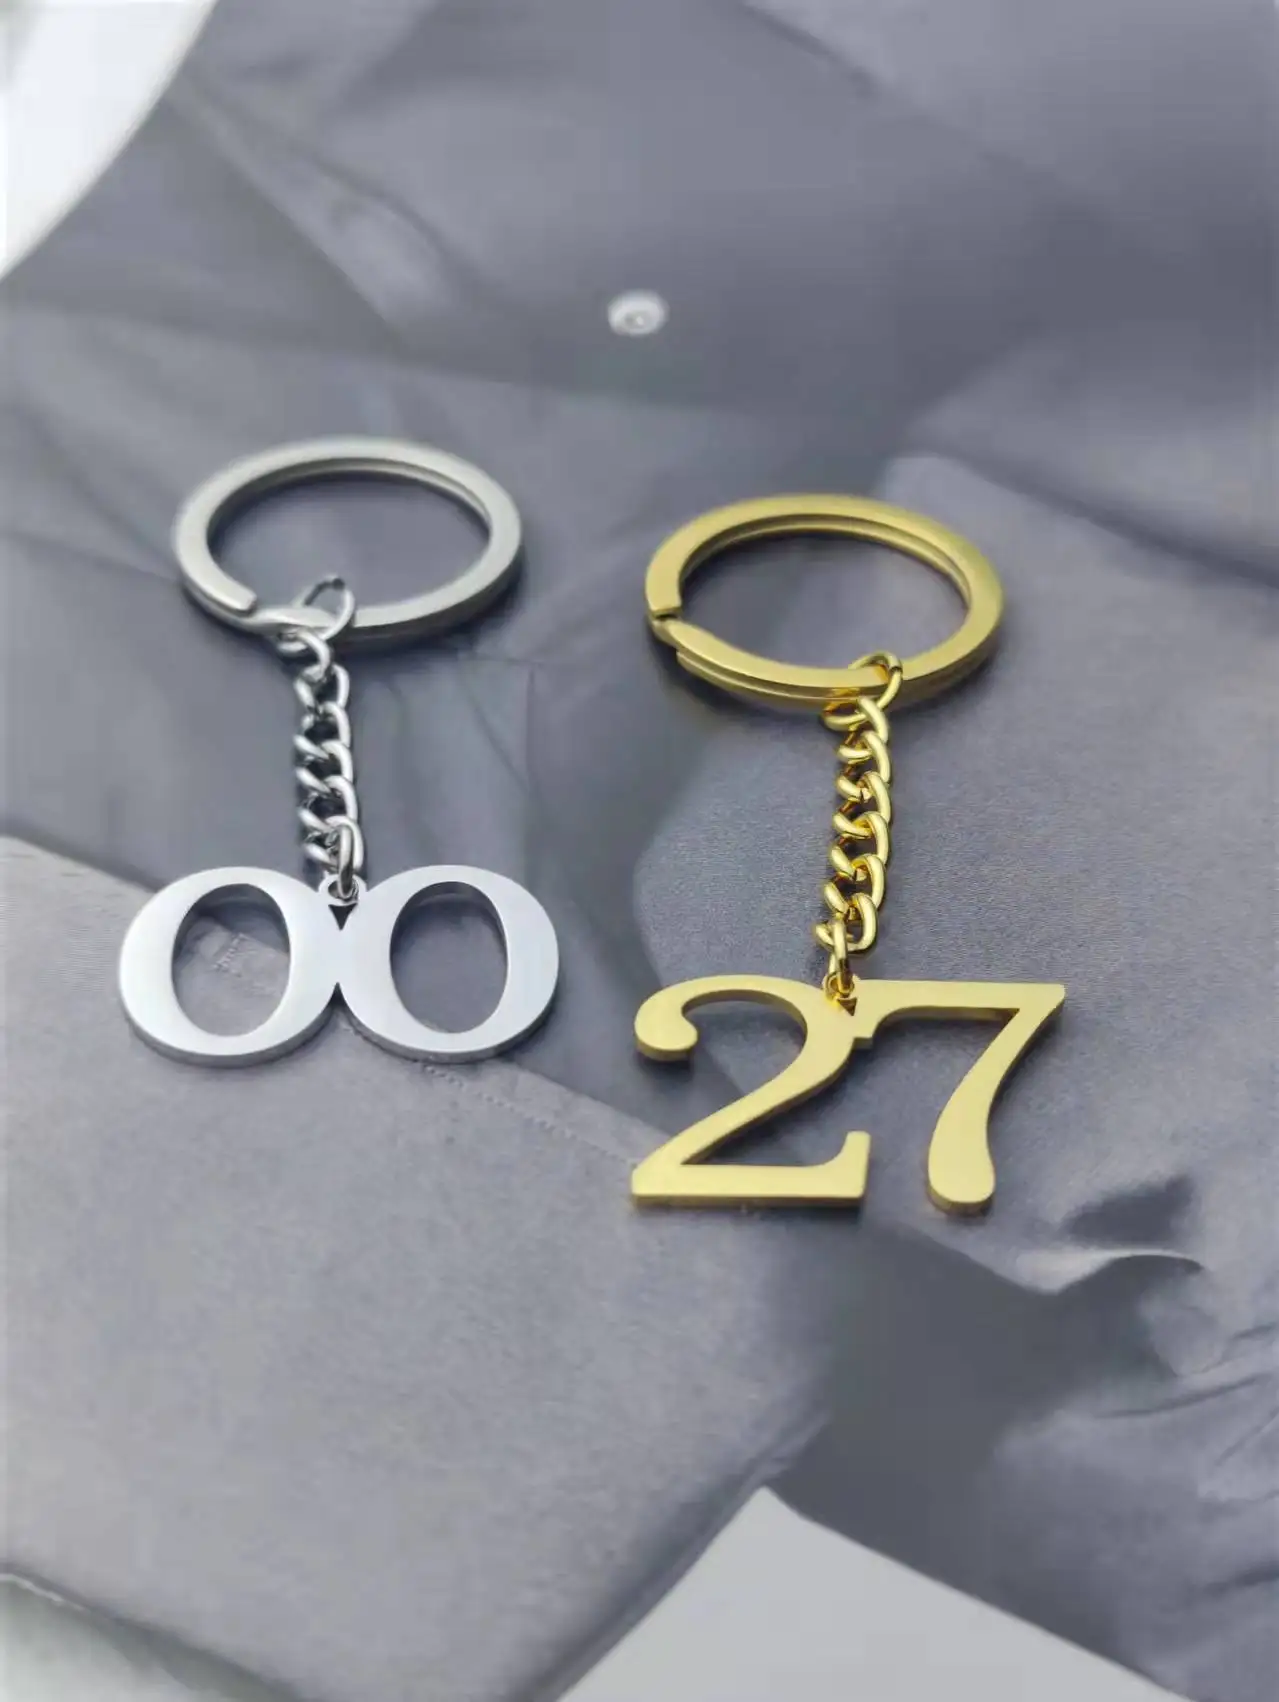 Personalized Key Chain Custom Key Ring Initials Letter Drive Safe Stainless Steel Jewelry For Men Women Keychain Friends Gifts personalized custom initials travel storage wedding bridesmaid ring jewelry box organizer earrings holder case display stand box